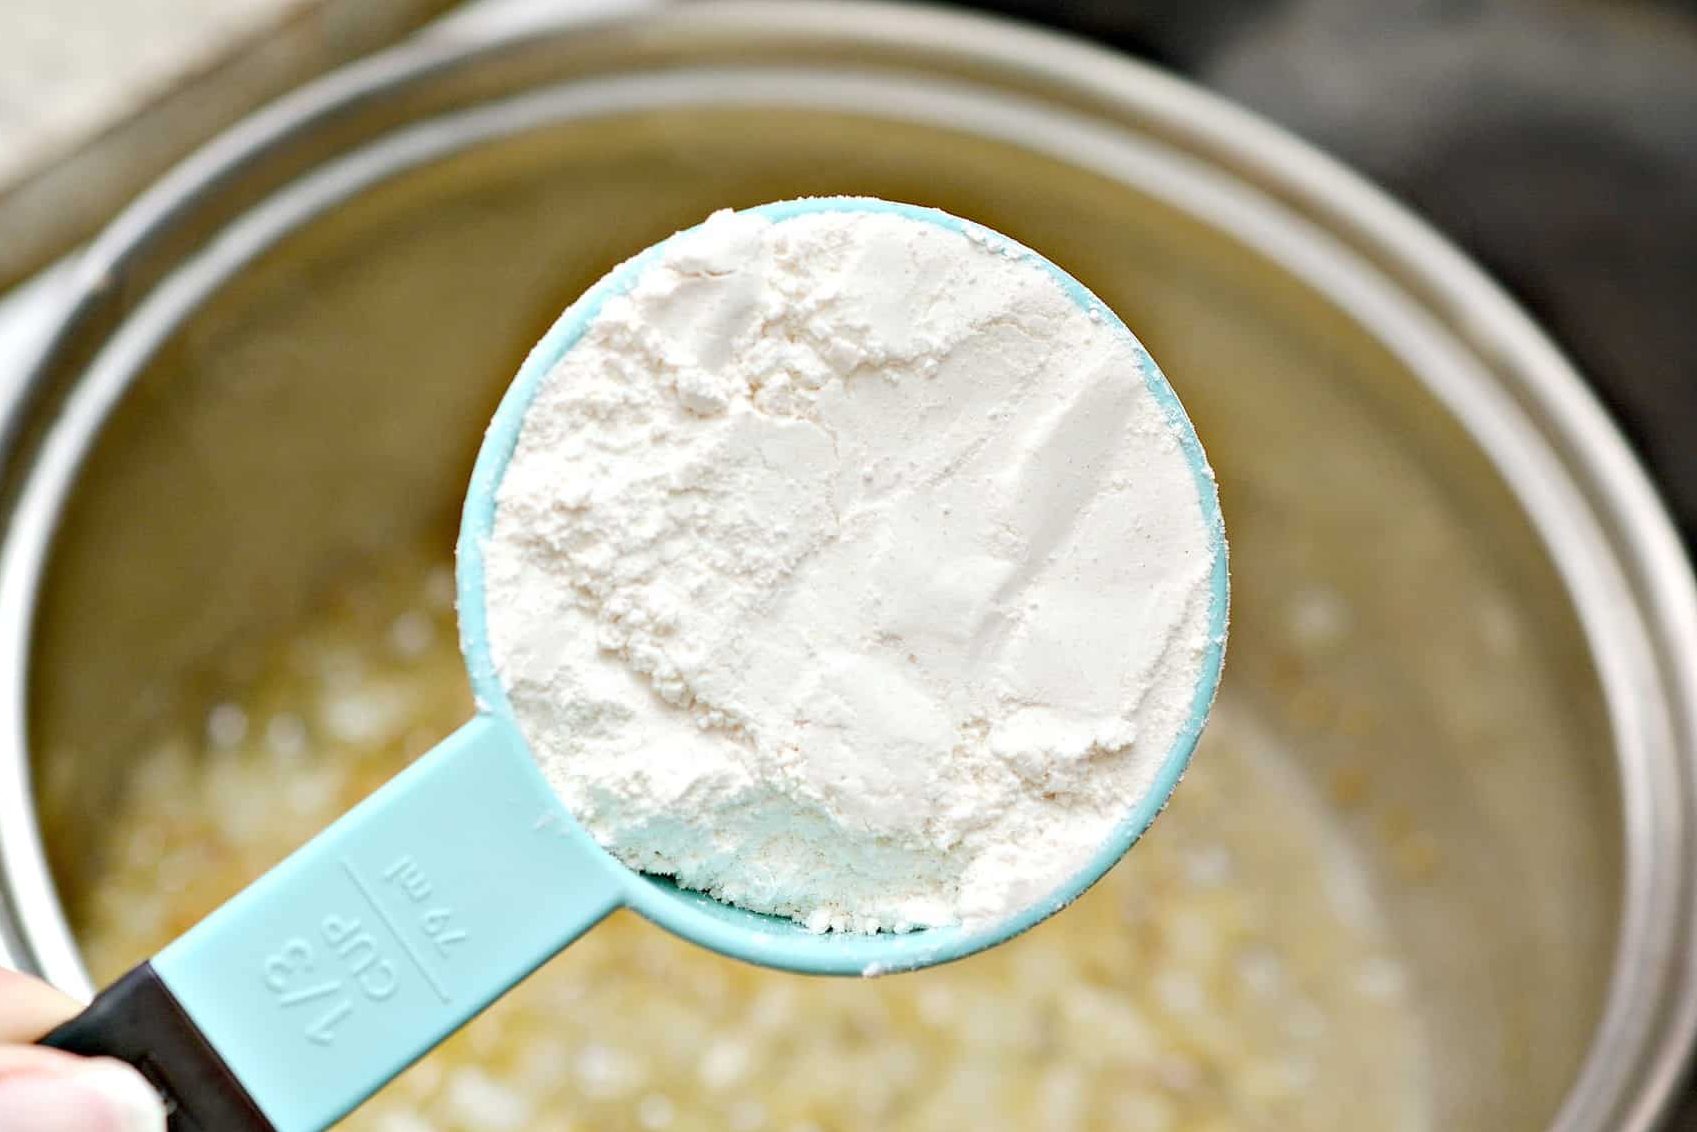 Place the flour in the skillet, and stir to combine, cooking for 1 minute.